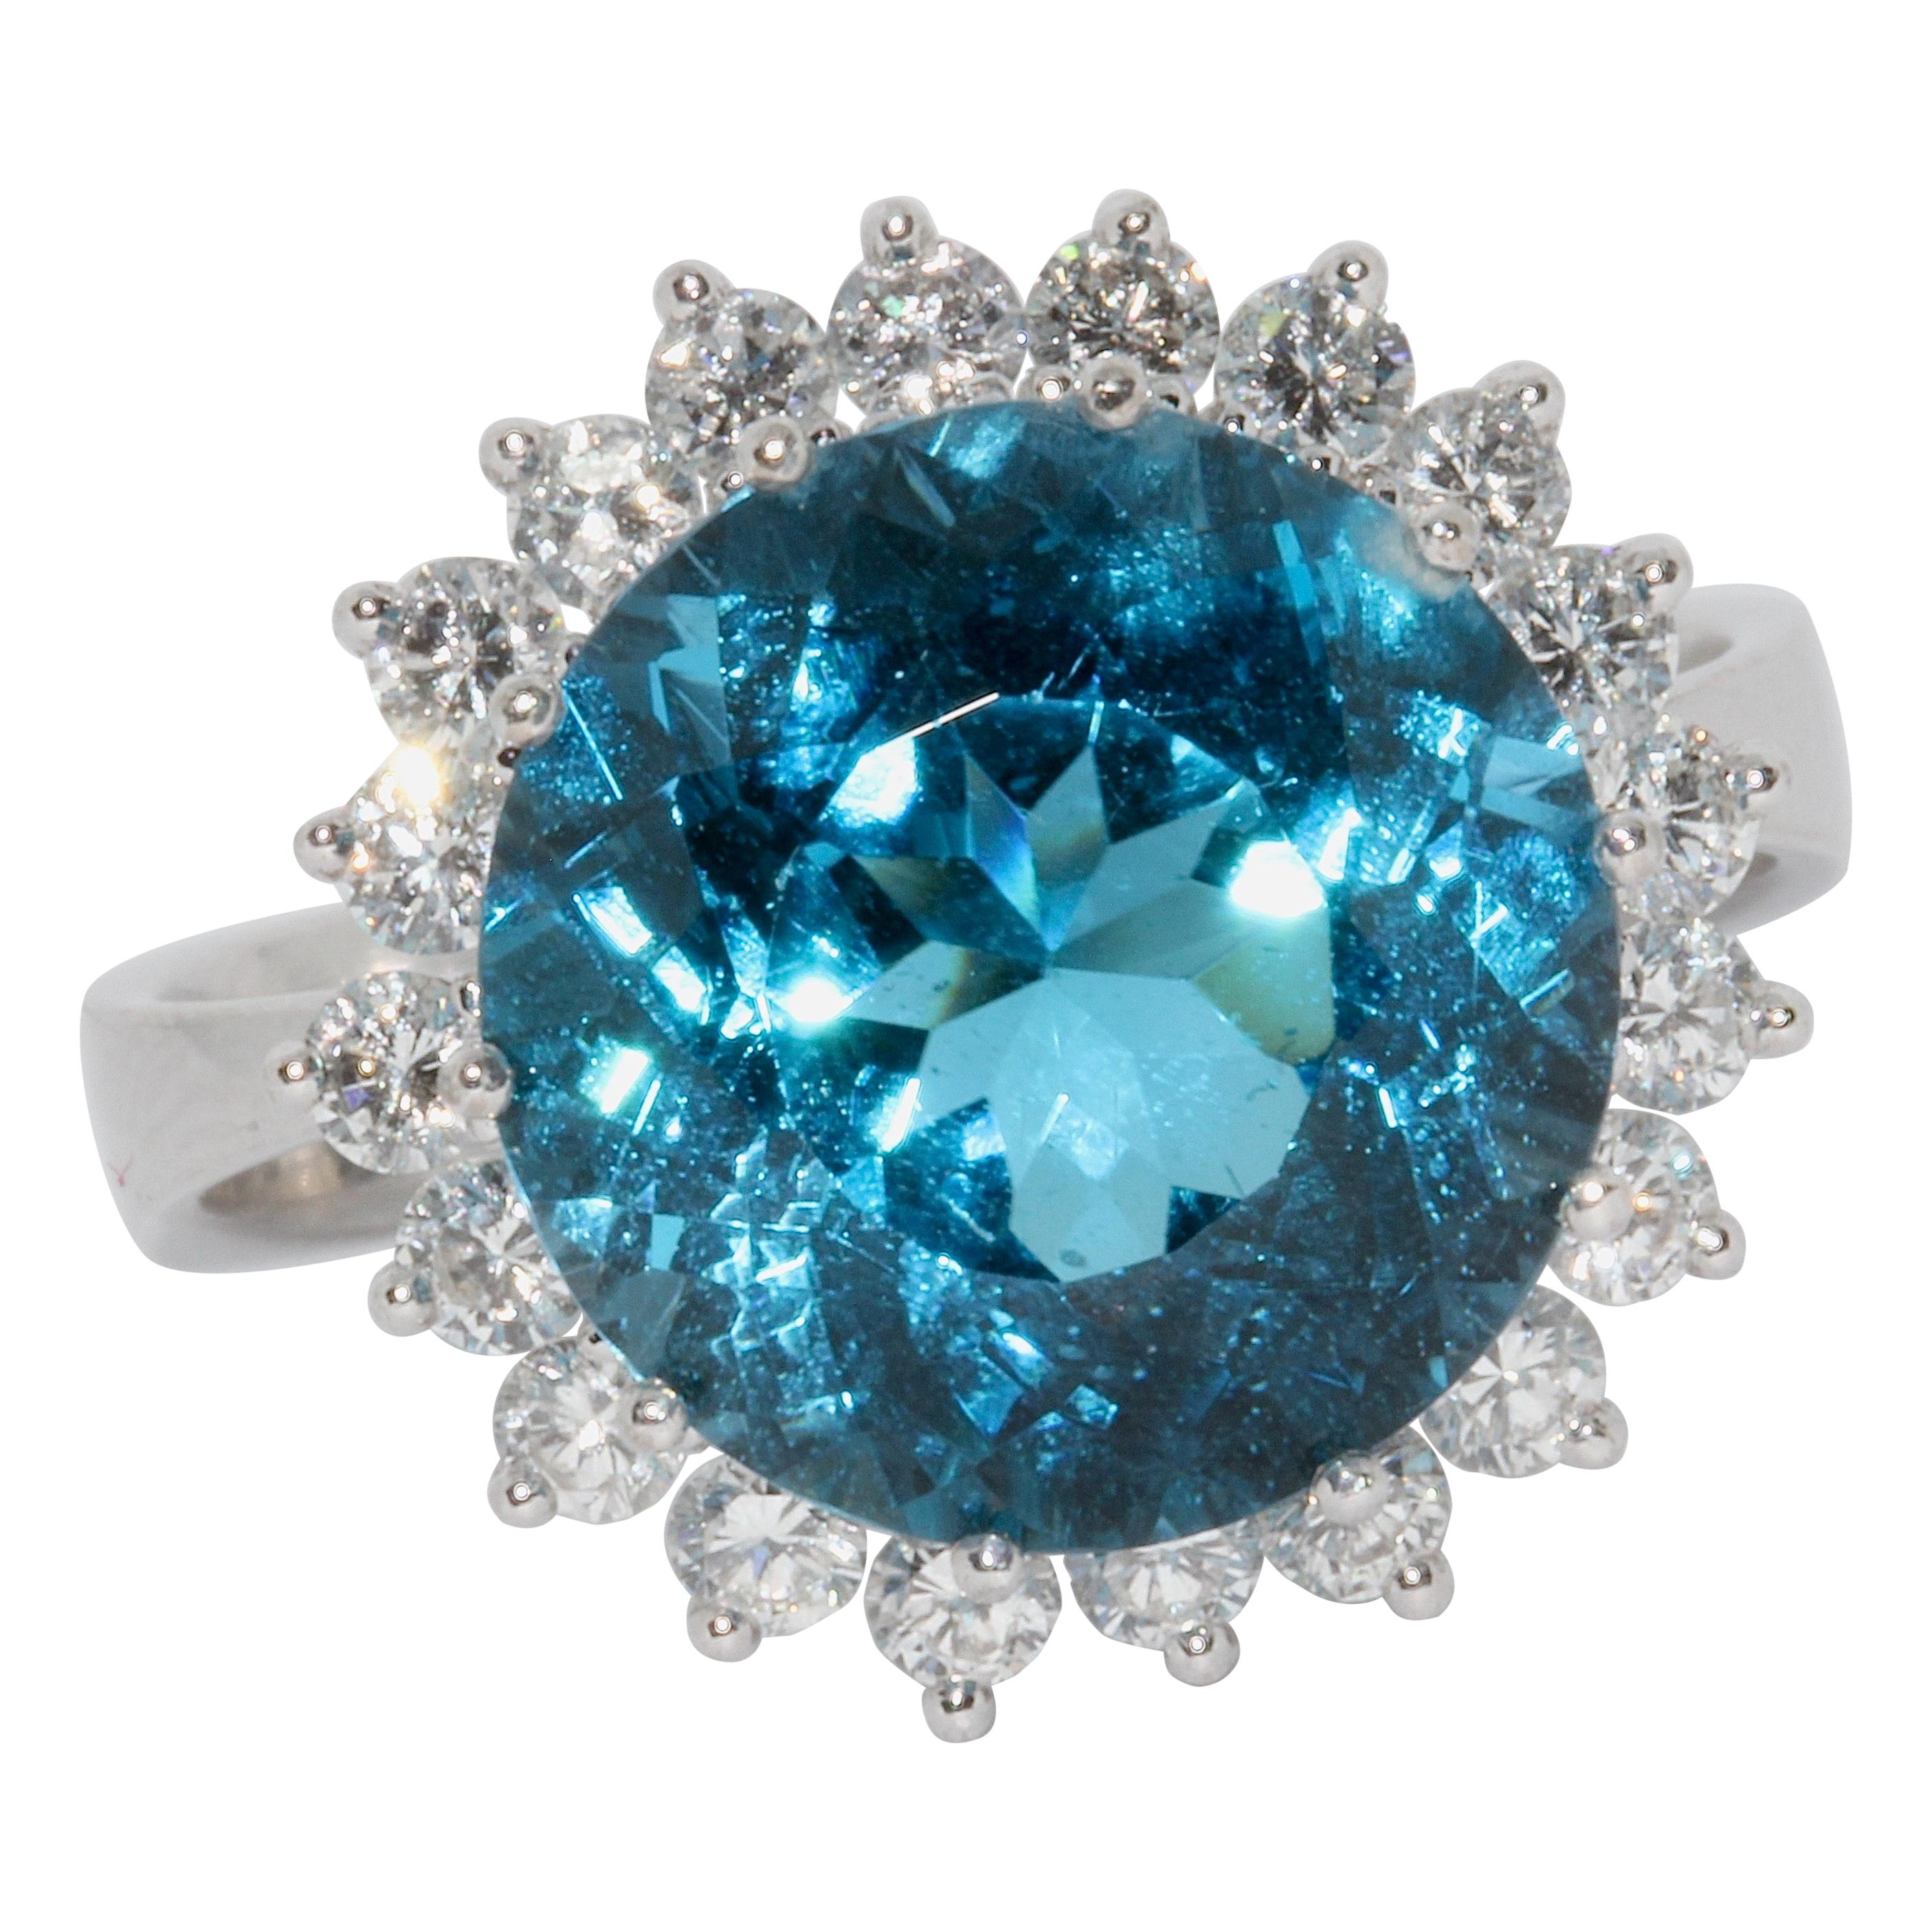 White Gold Ladies Ring with Large, Faceted Blue Topaz and Diamonds